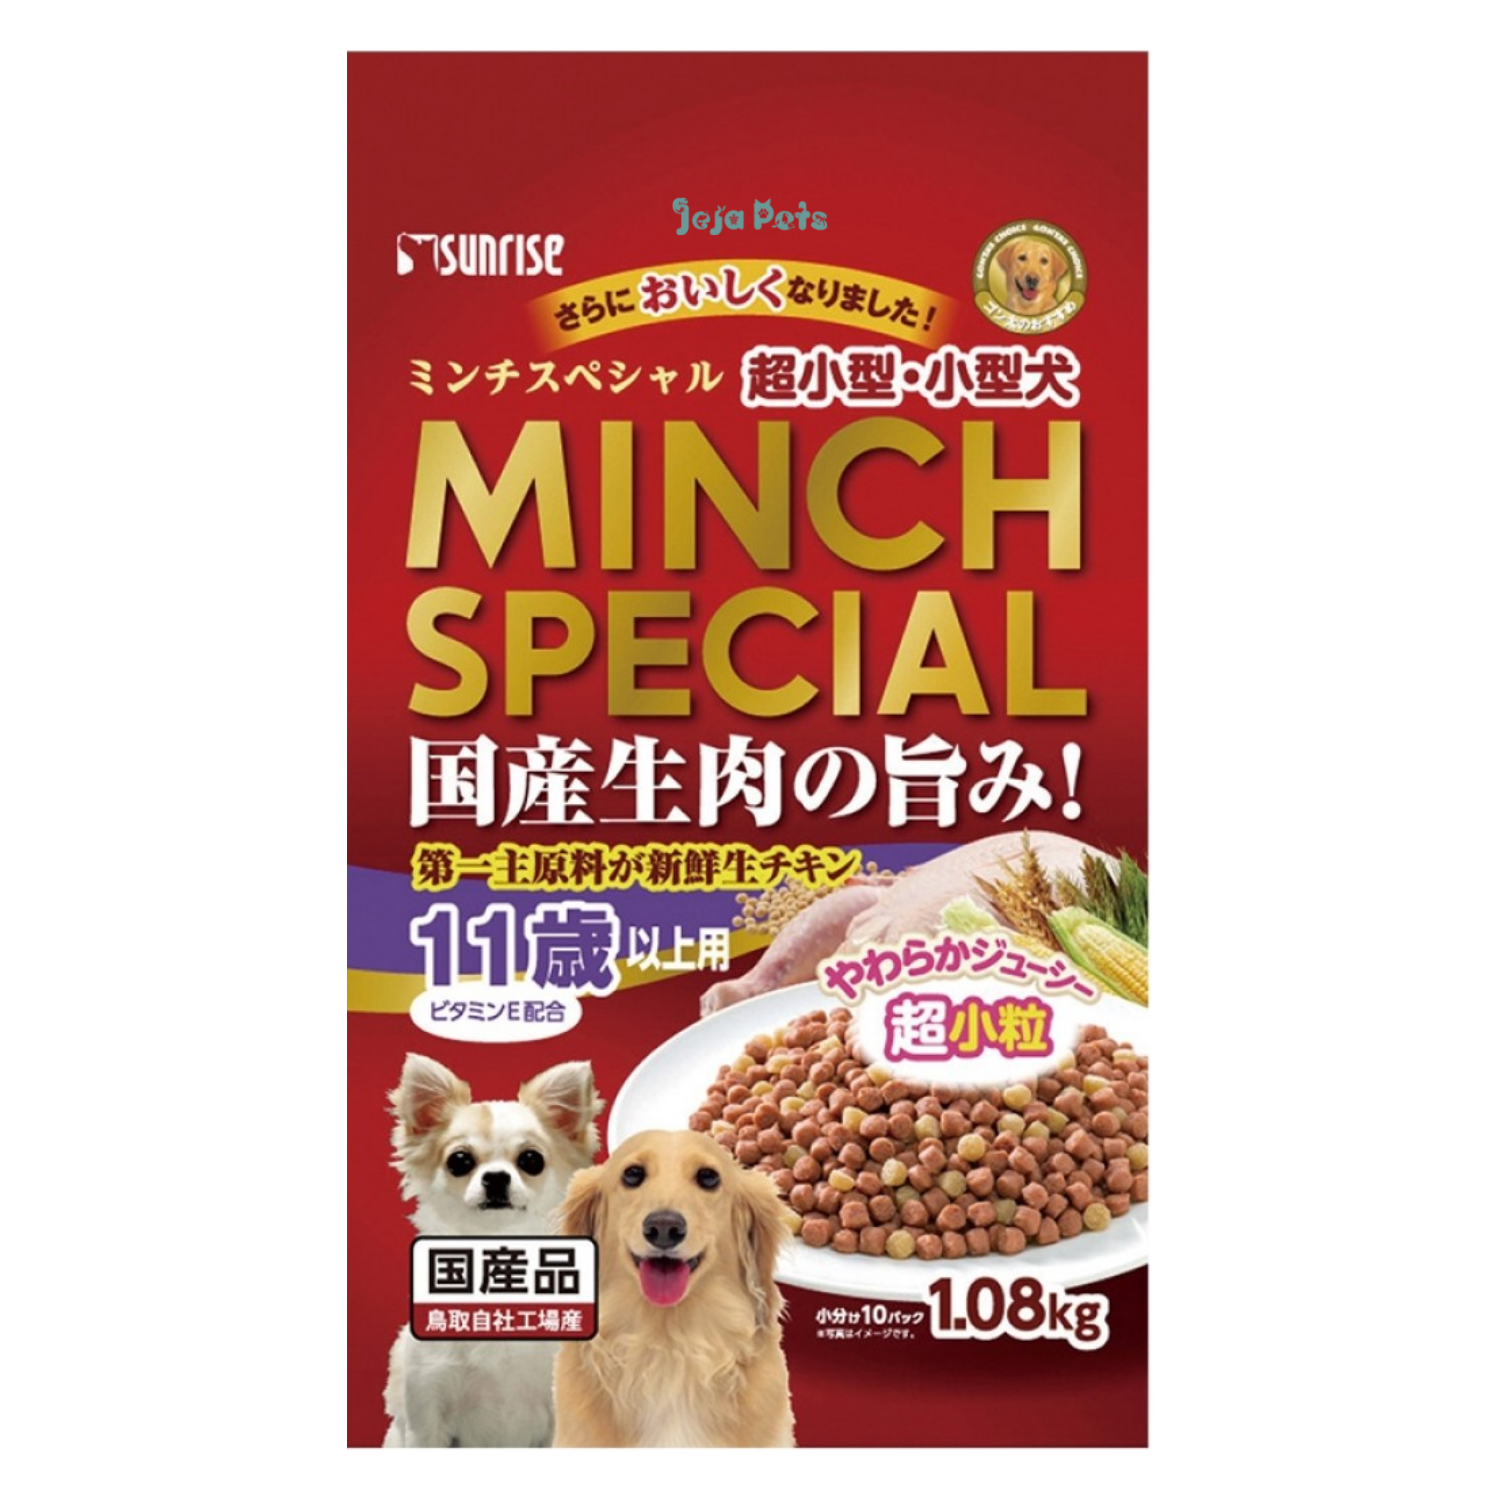 Sunrise Minch Special Semi-Moist Dog Food Chicken and Seafood Senior 11+ - 1.2kg